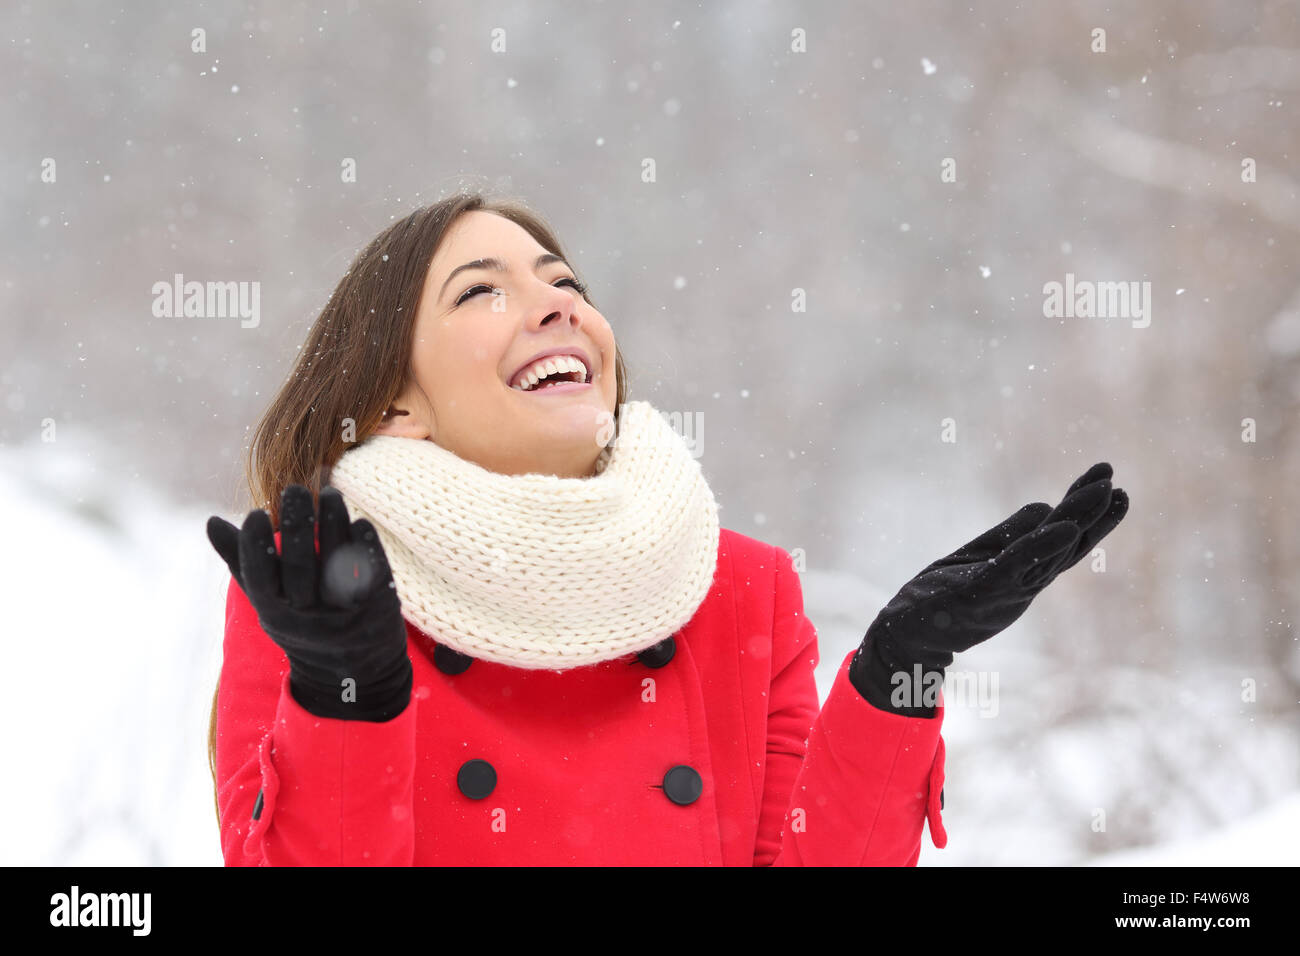 Candid happy girl enjoying snow in winter wearing a red jacket Stock Photo